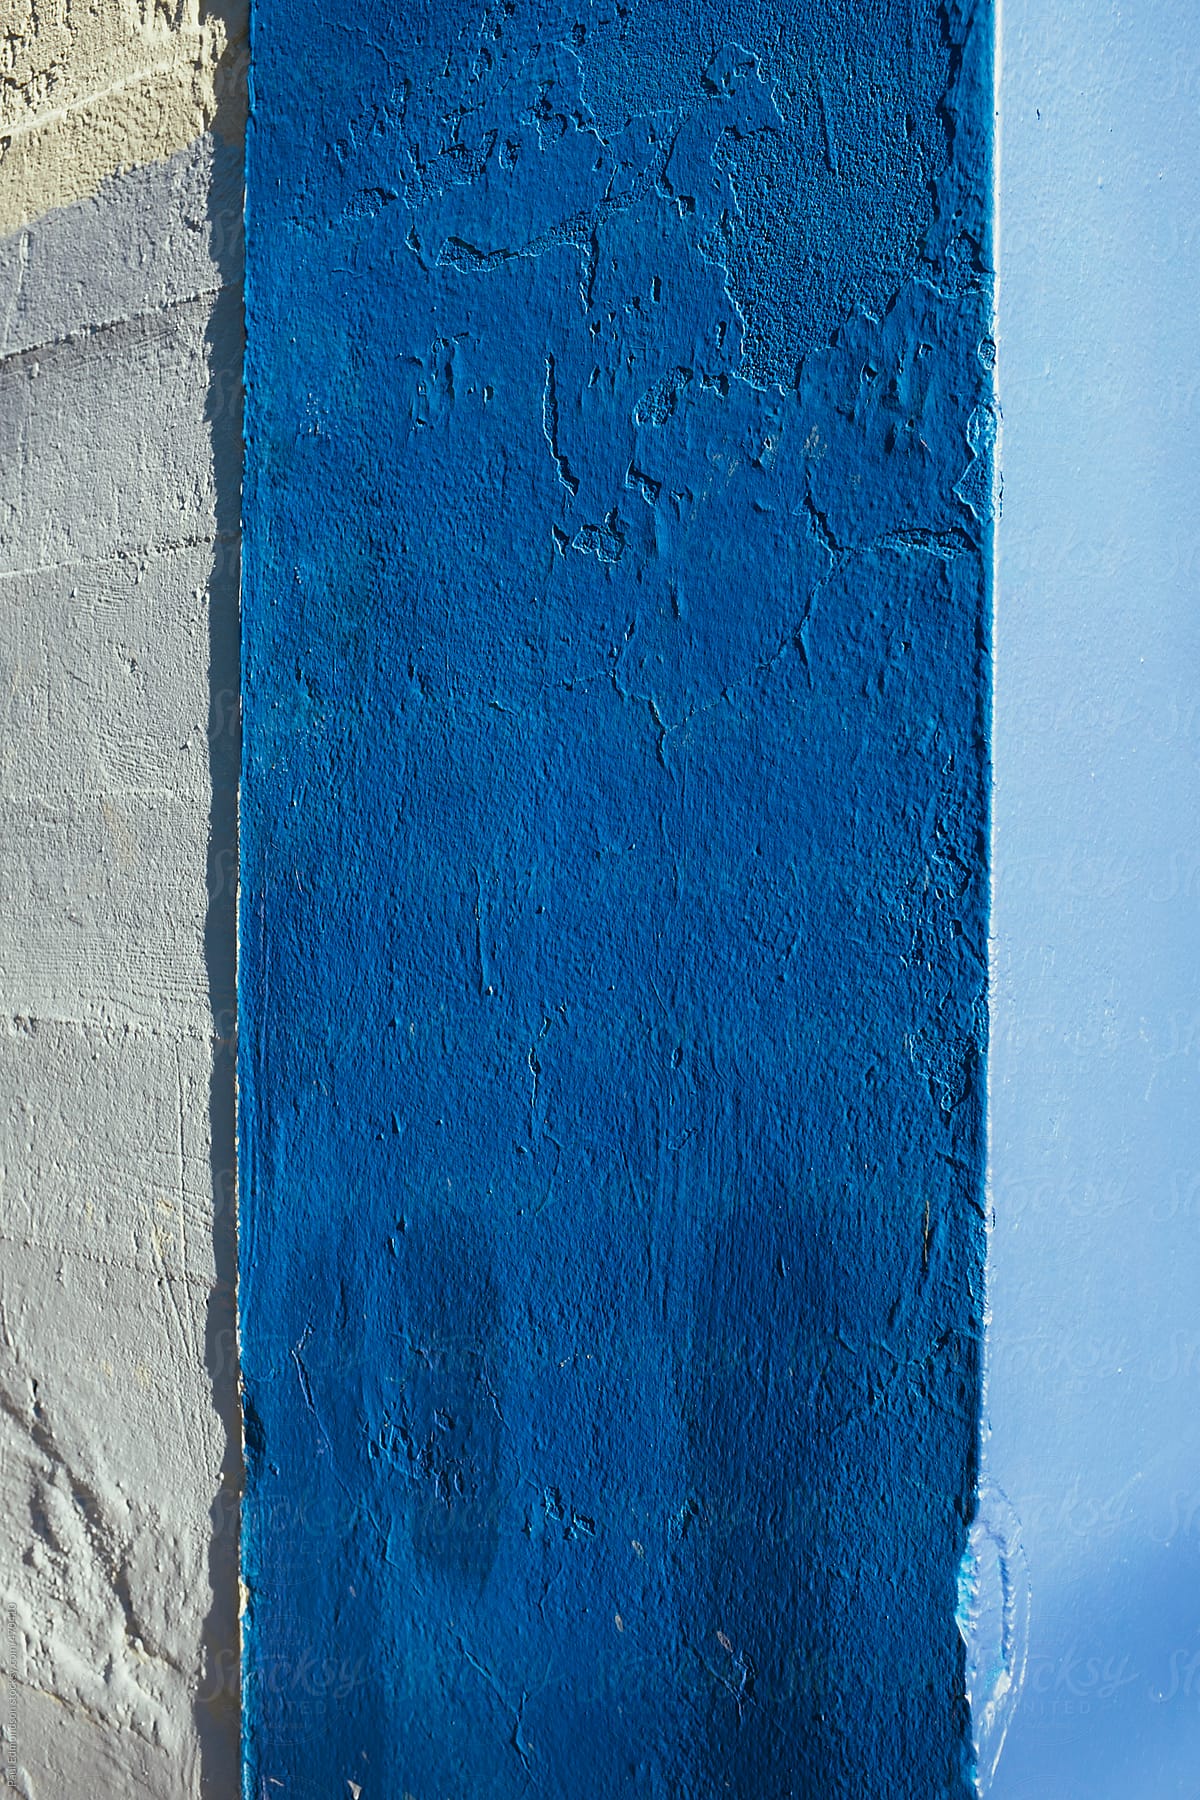 Corner of building wall exterior, painted different shades of blue and casting shadow